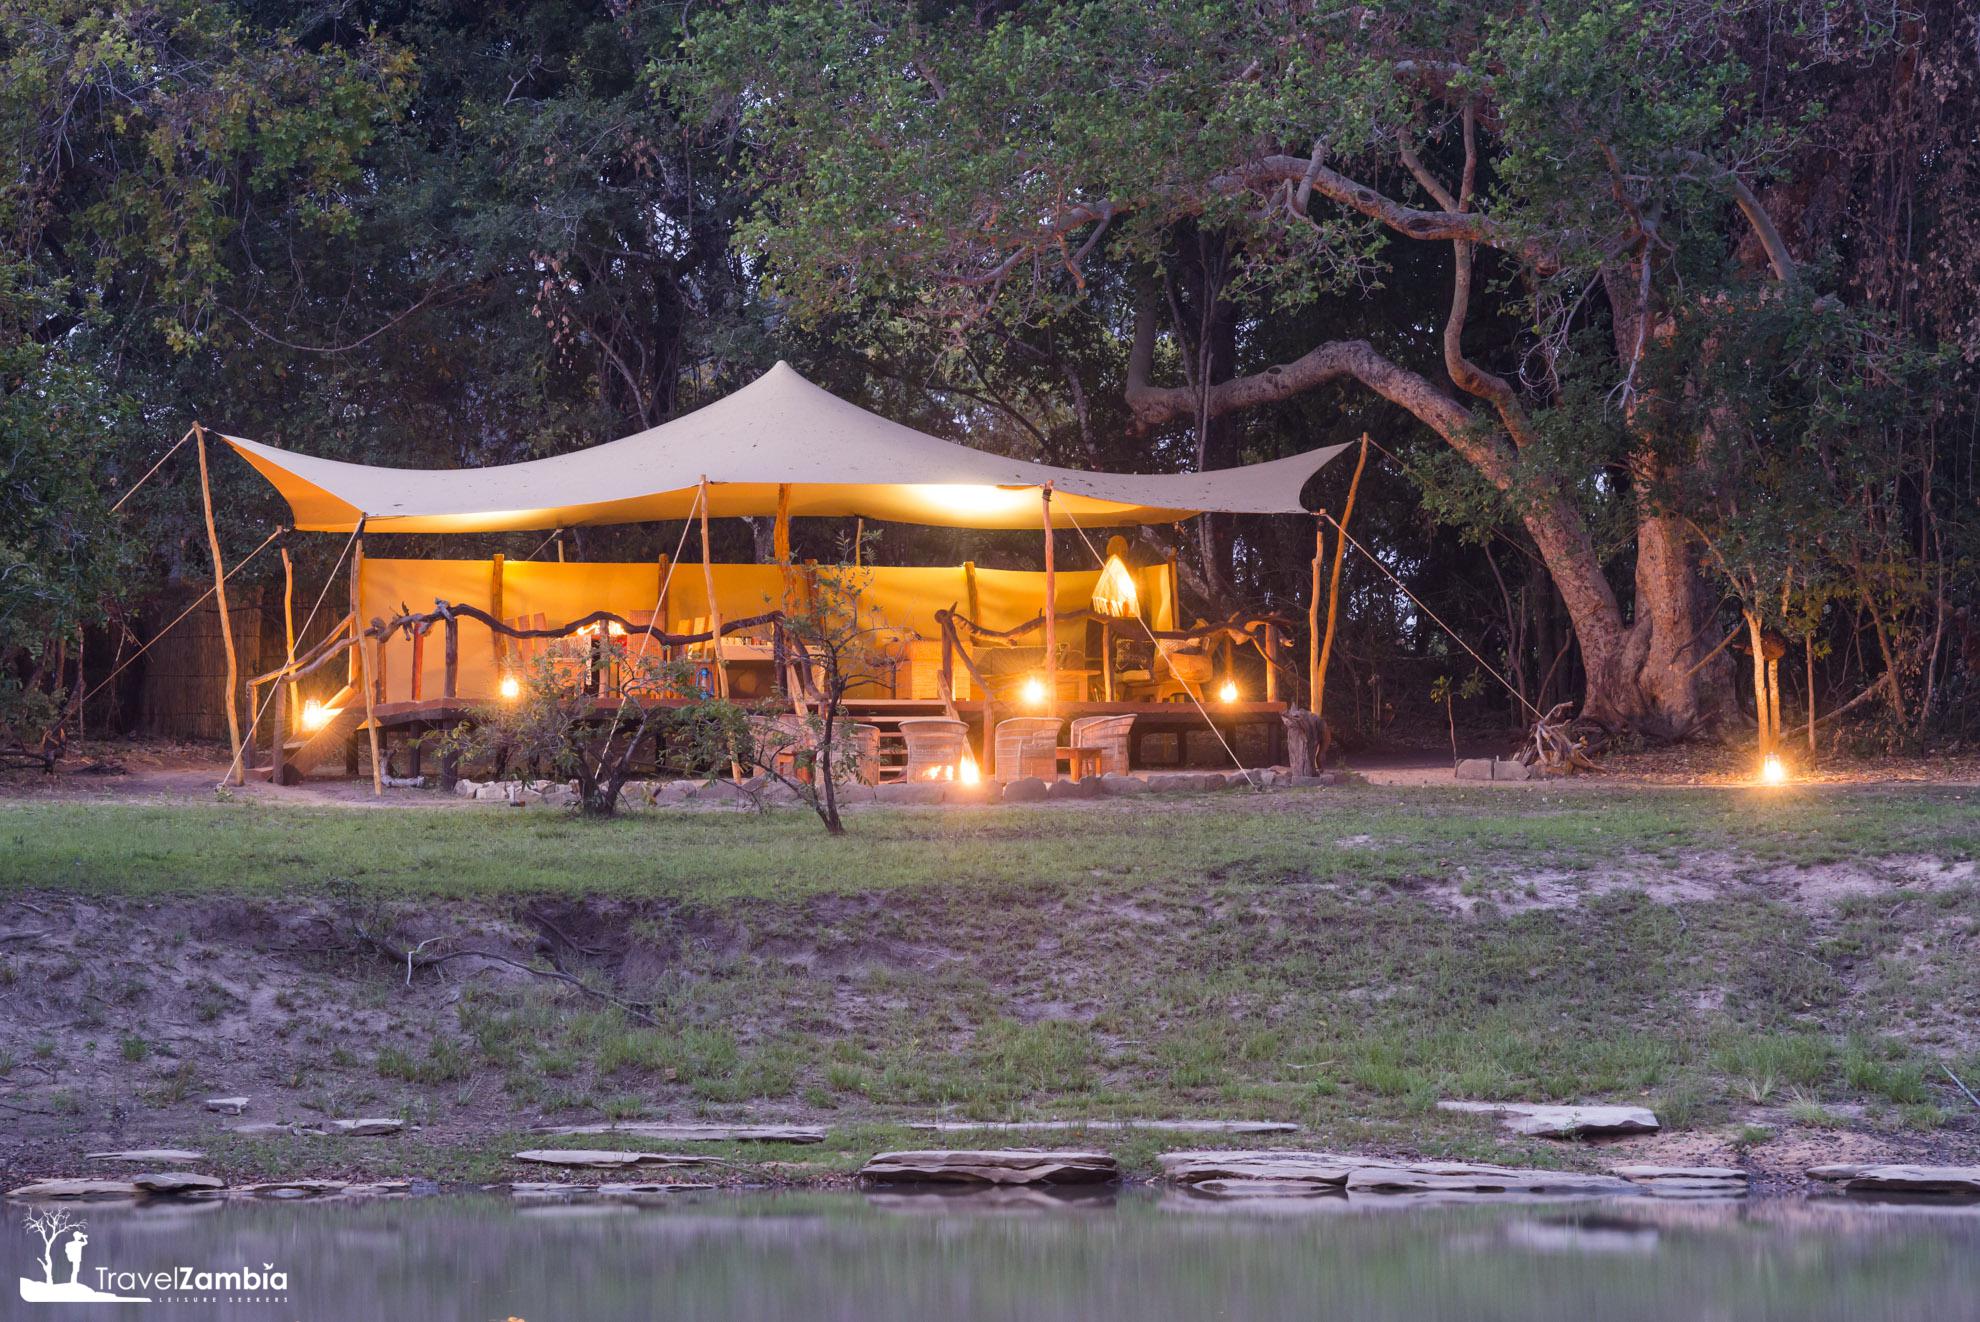 Day 3 to Day 5 - Fig Tree Camp in Kafue National Park